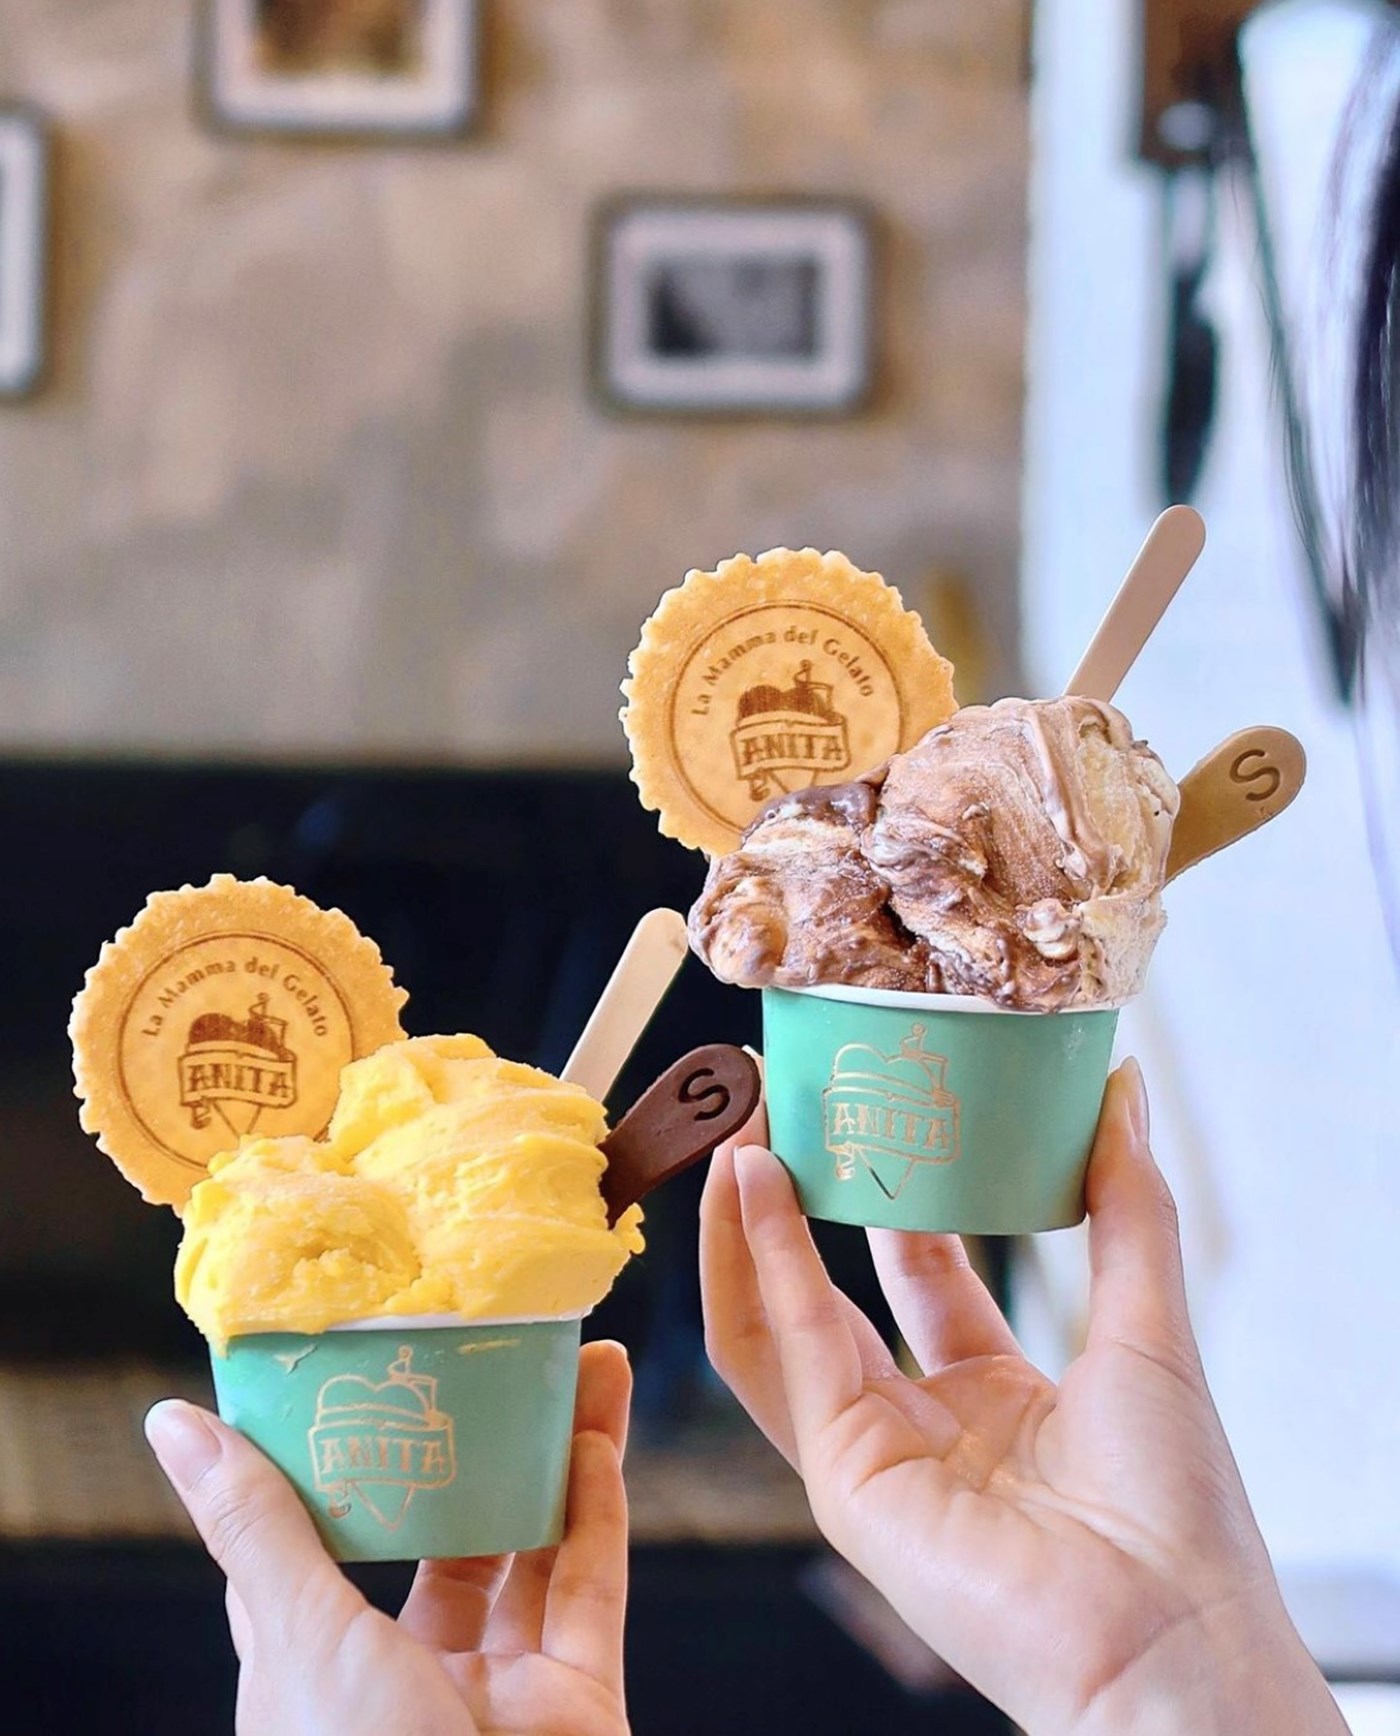 Two hands display two flavours of gelato in cups, one scoop of mango and one scoop of cookies and cream.